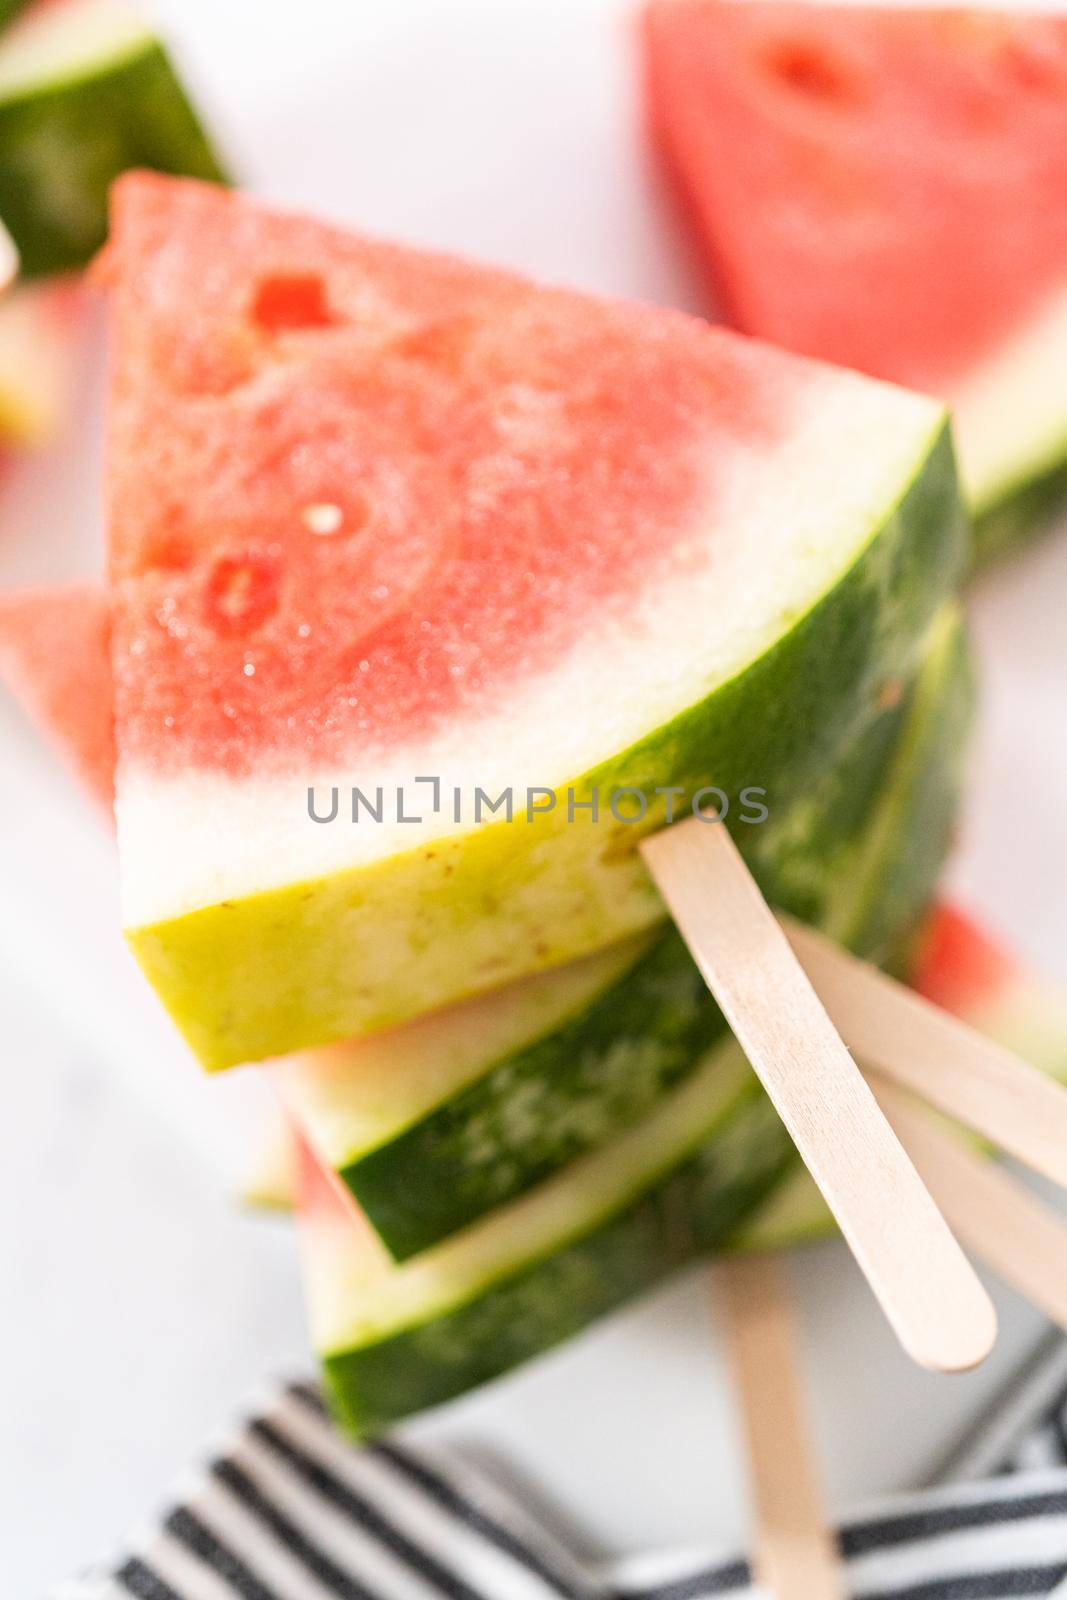 Chili lime watermelon pops by arinahabich